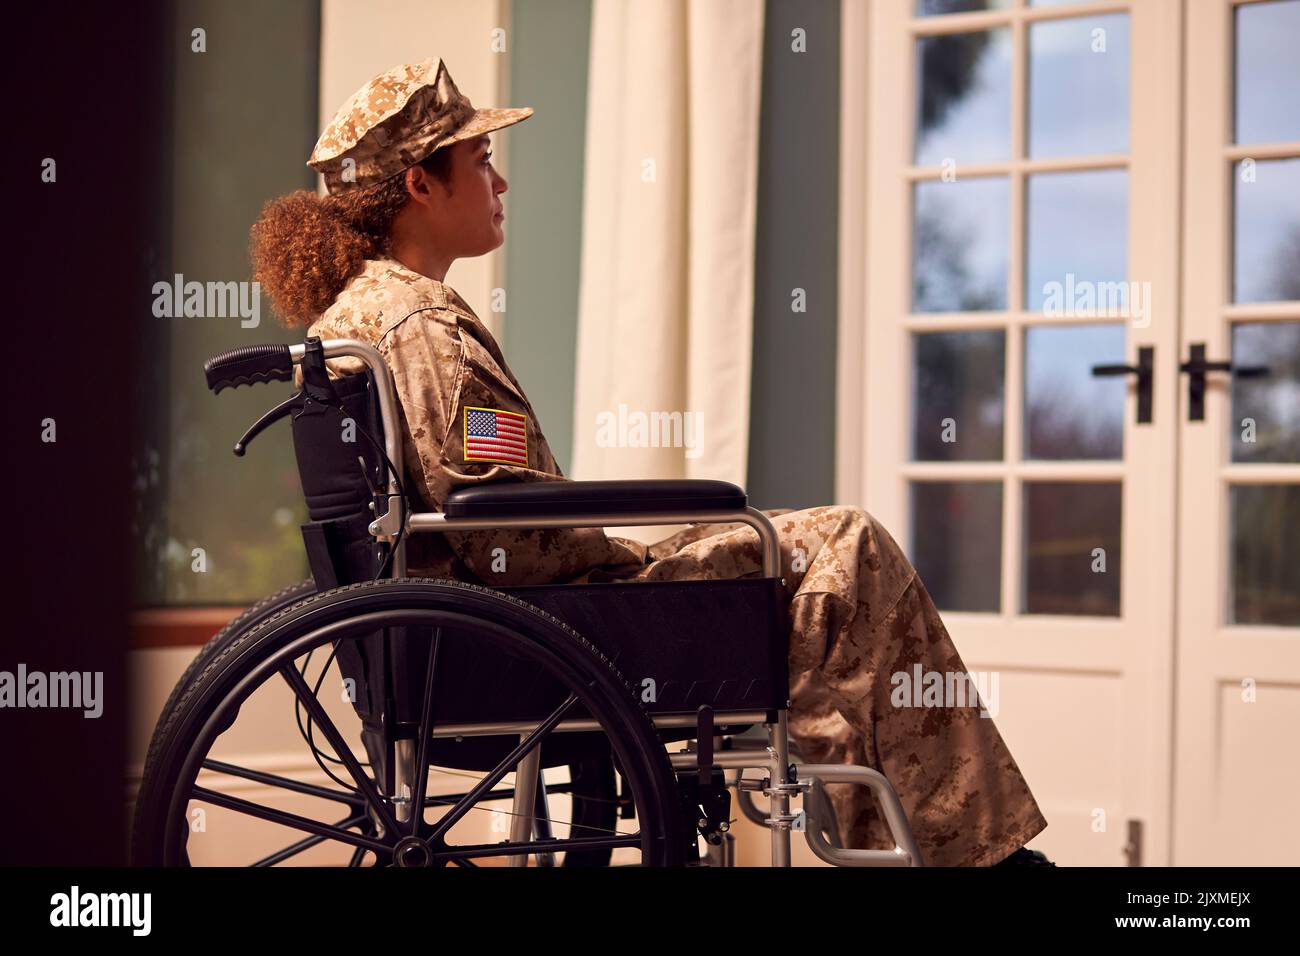 Injured Female American Soldier Wearing Uniform Sitting In Wheelchair Looking Out Of Window Stock Photo